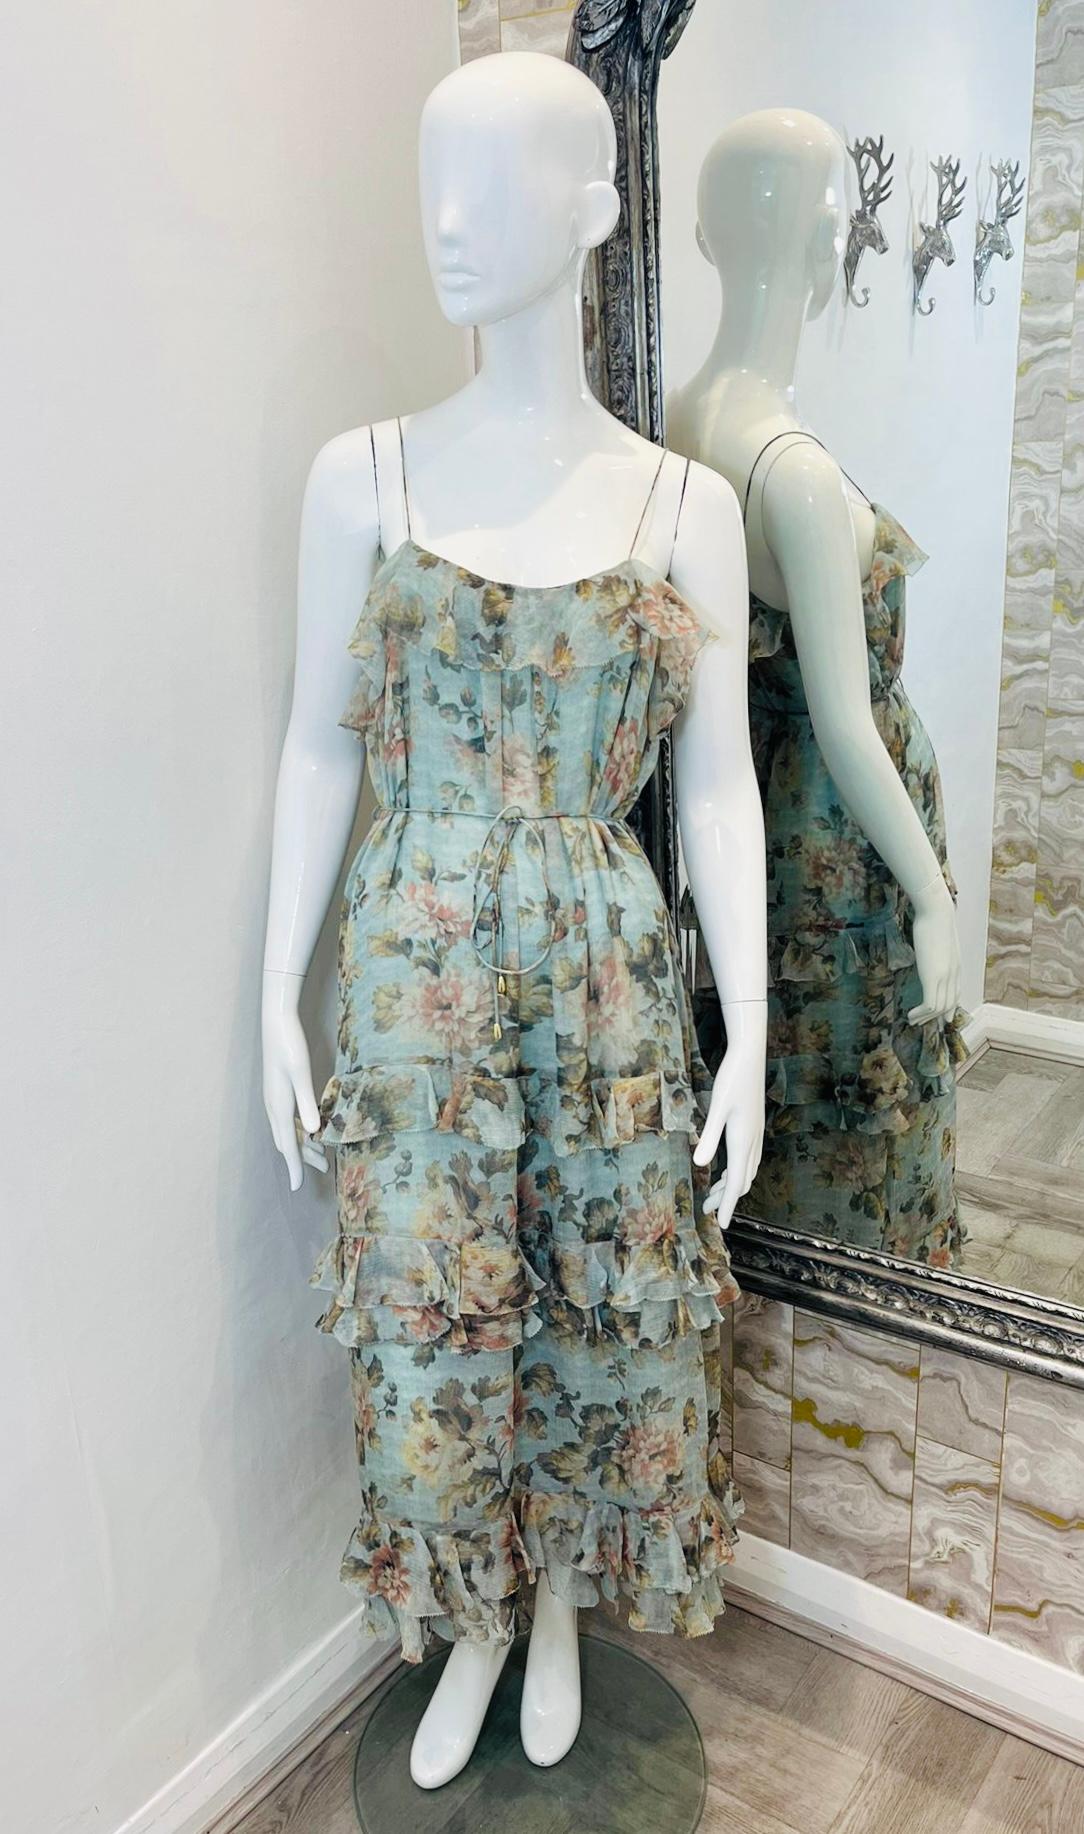 Zimmermann Frill Tiered Silk Dress

Sky blue, maxi dress designed with muted coloured floral prints.

Detailed with frill tiered skirt and neckline.

Featuring spaghetti straps and self-tied waist.

Size – 1 - S

Condition – Very Good

Composition –